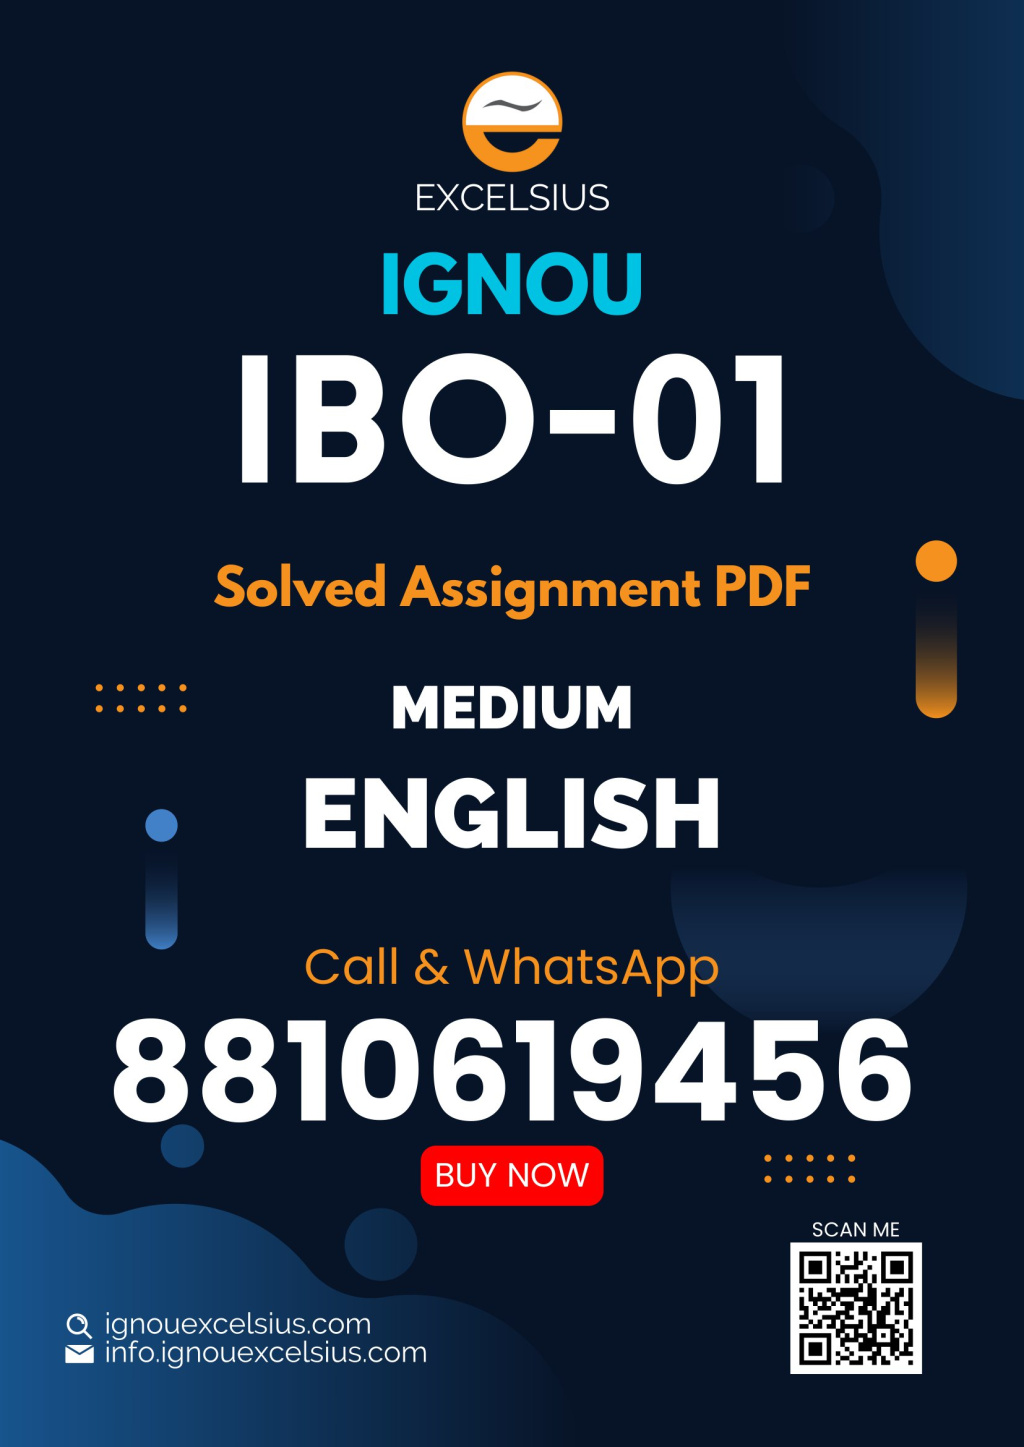 IGNOU IBO-01 - International Business Environment, Latest Solved Assignment-July 2022 – January 2023